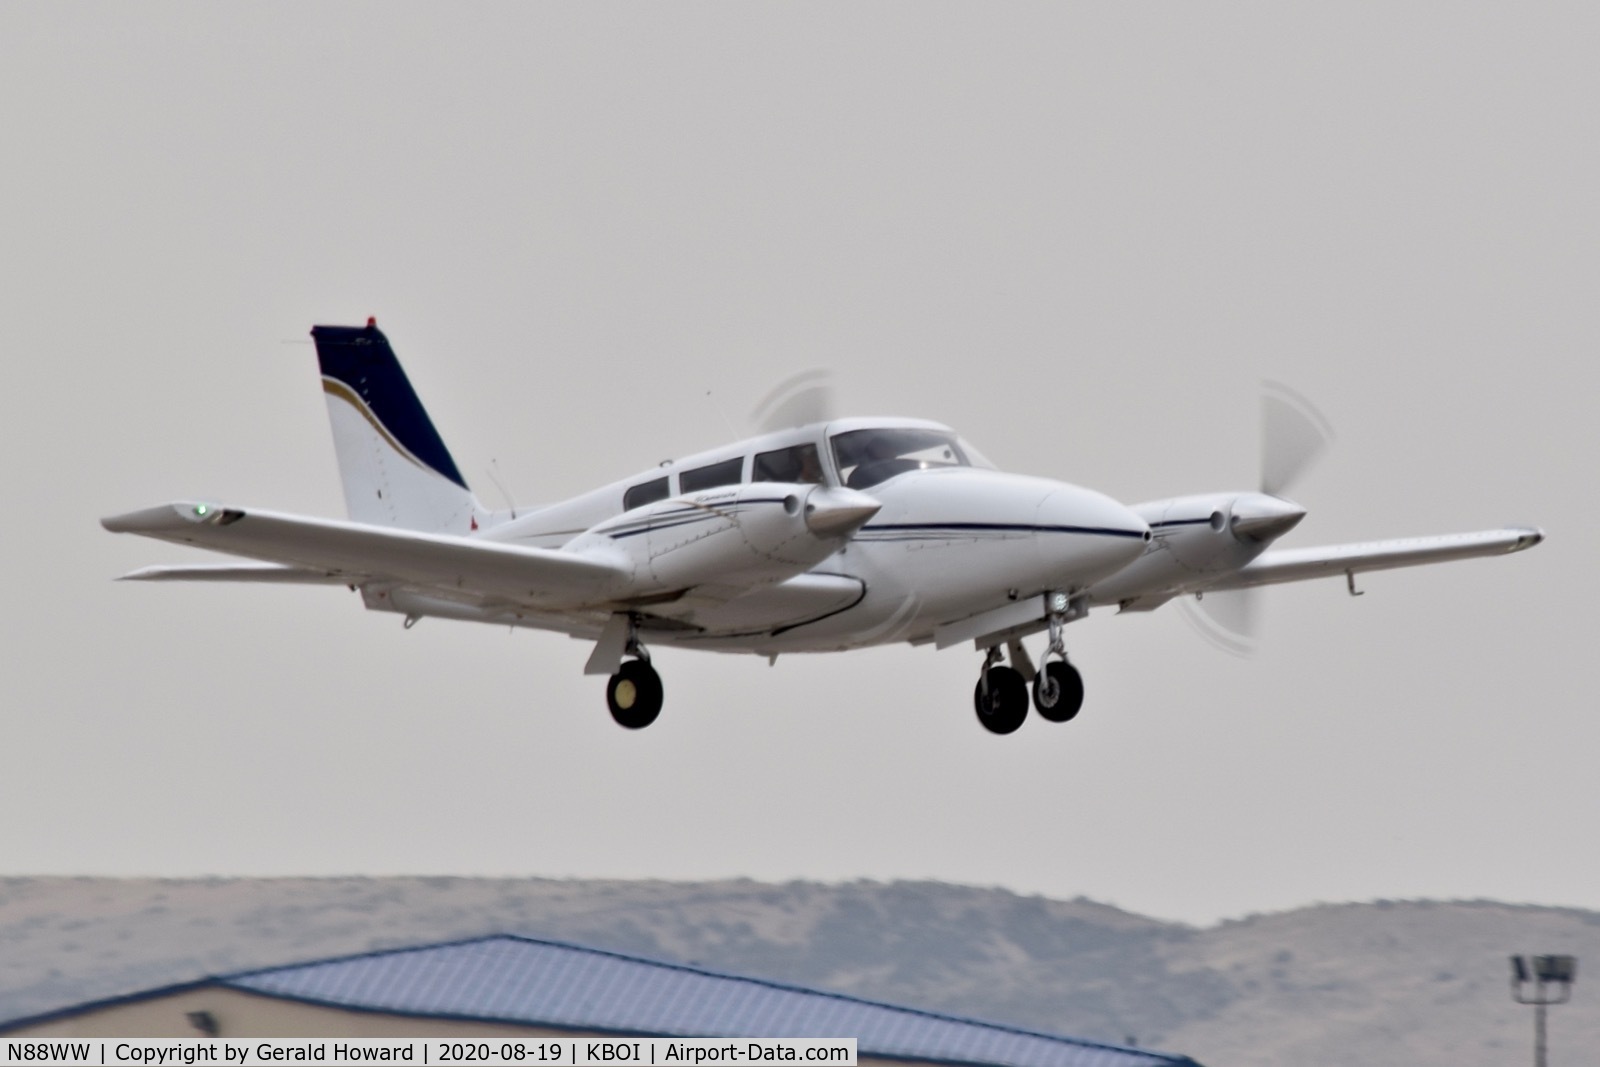 N88WW, 1971 Piper PA-39 C/N 39-125, Take off from 28R.